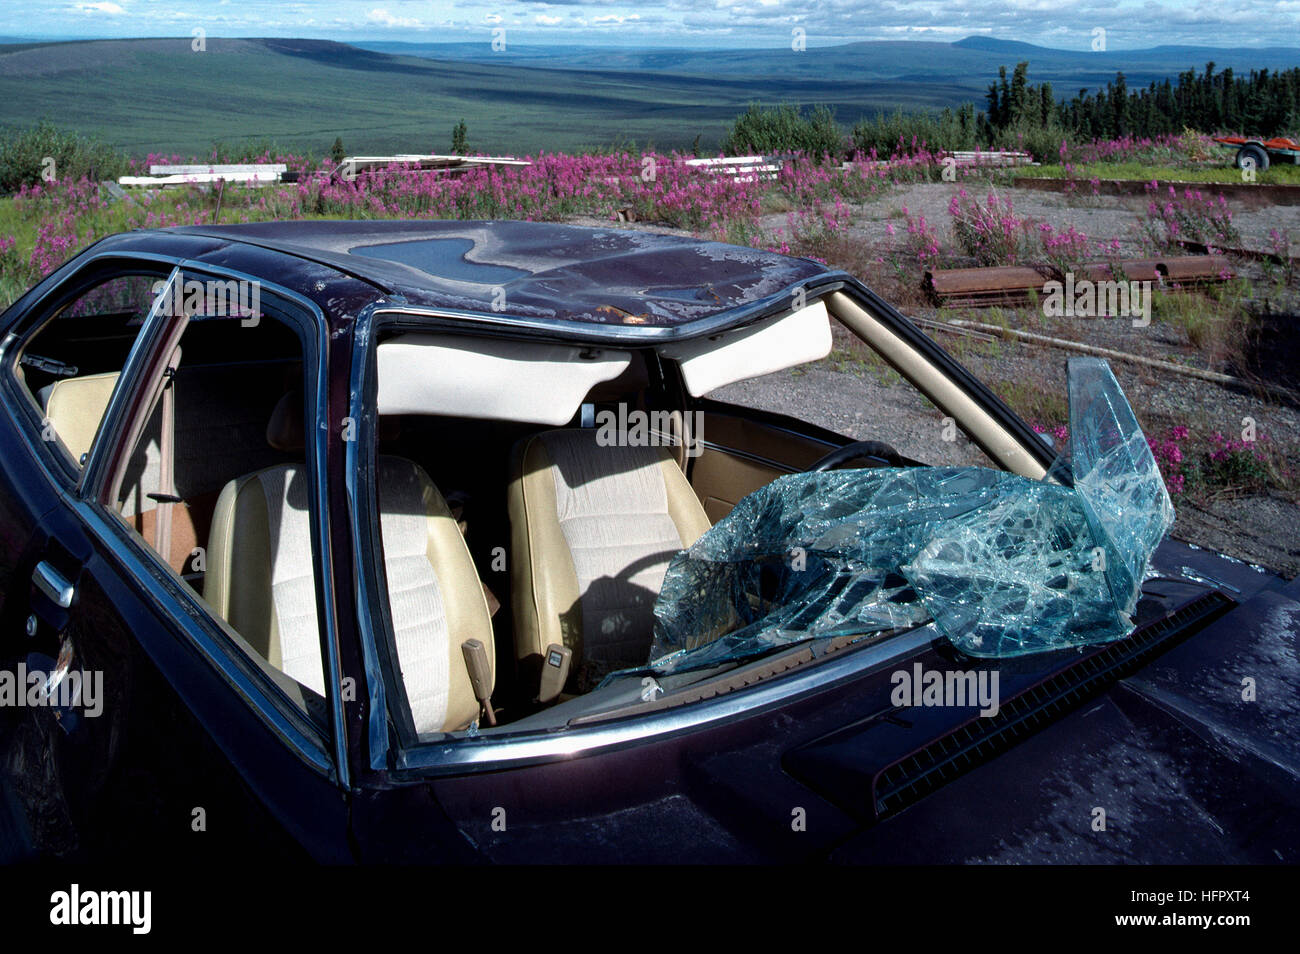 Highway / Road Accident - Badly Smashed Car damaged in Auto Crash - Broken Glass Windshield, Dented Roof Damage Stock Photo